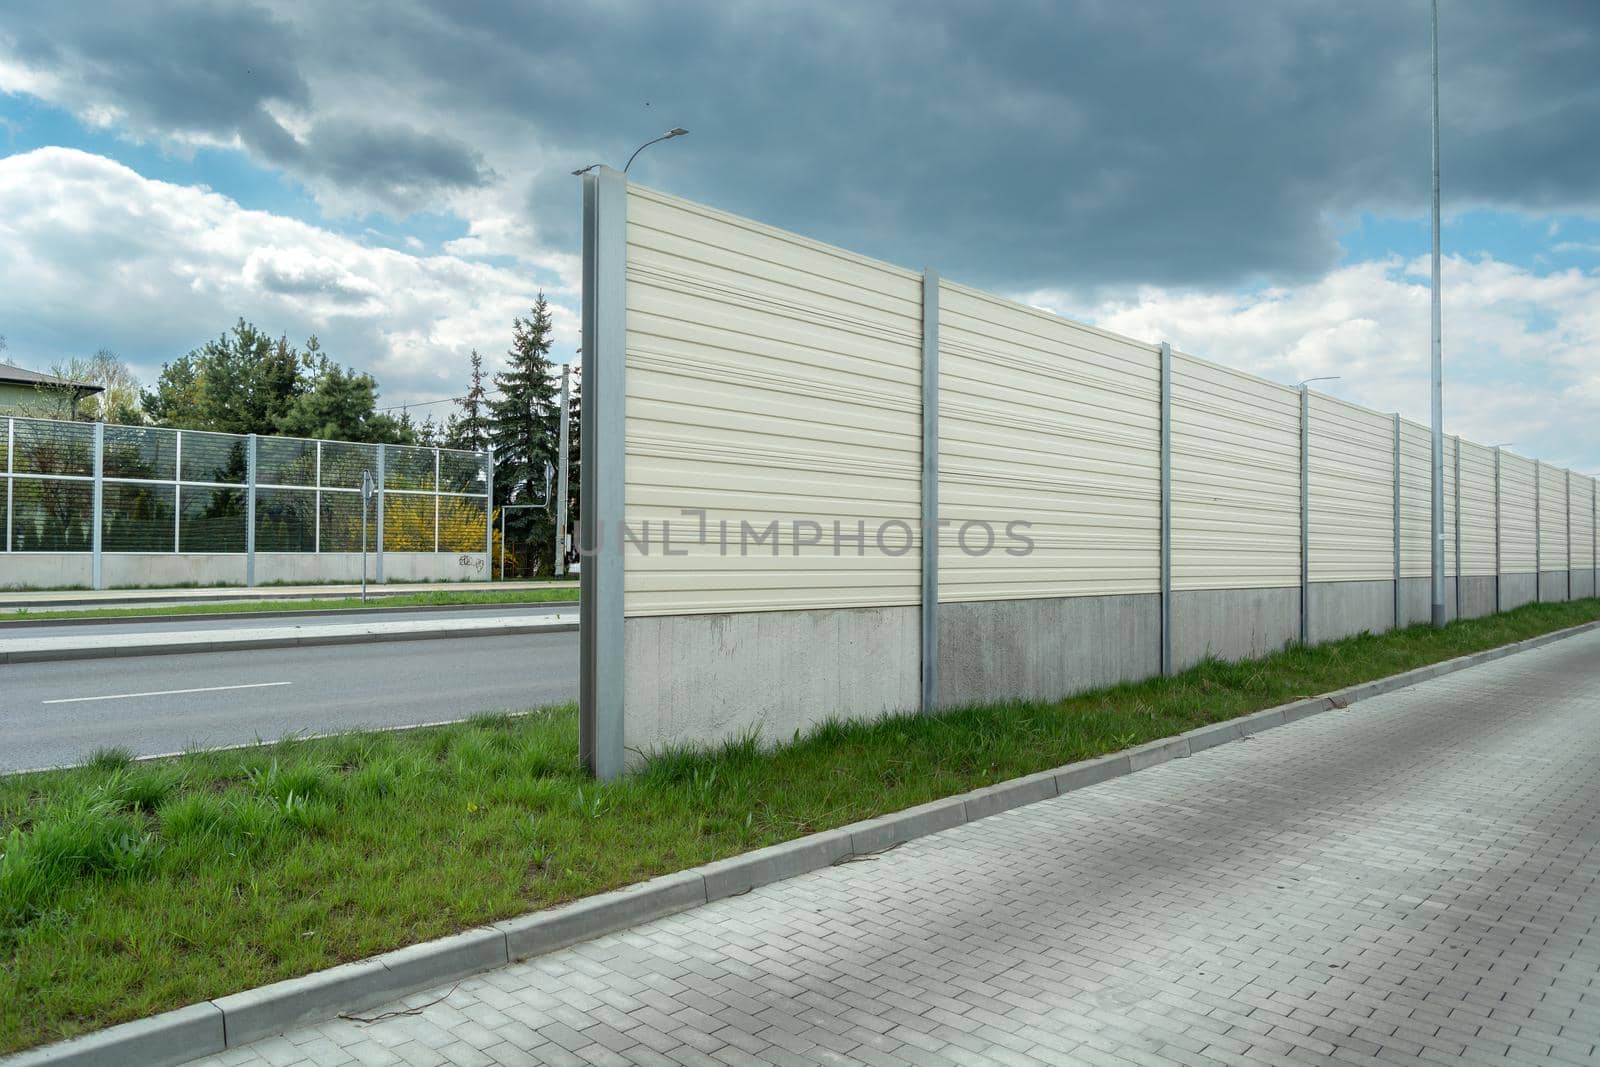 Noise barriers between two roads and cloudy sky, Chelm, Poland